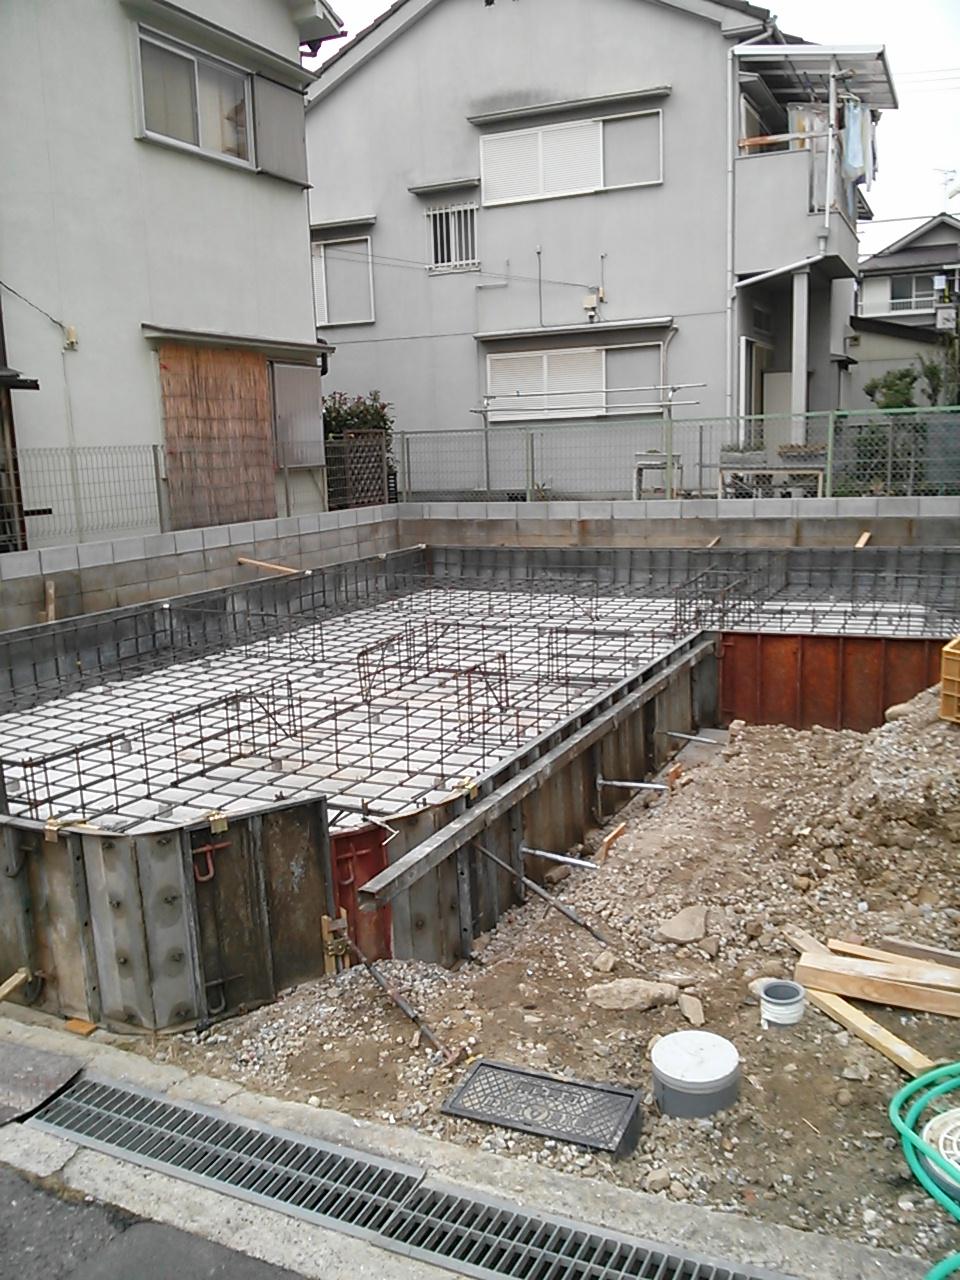 Local appearance photo. shortly, It is the foundation concrete work.